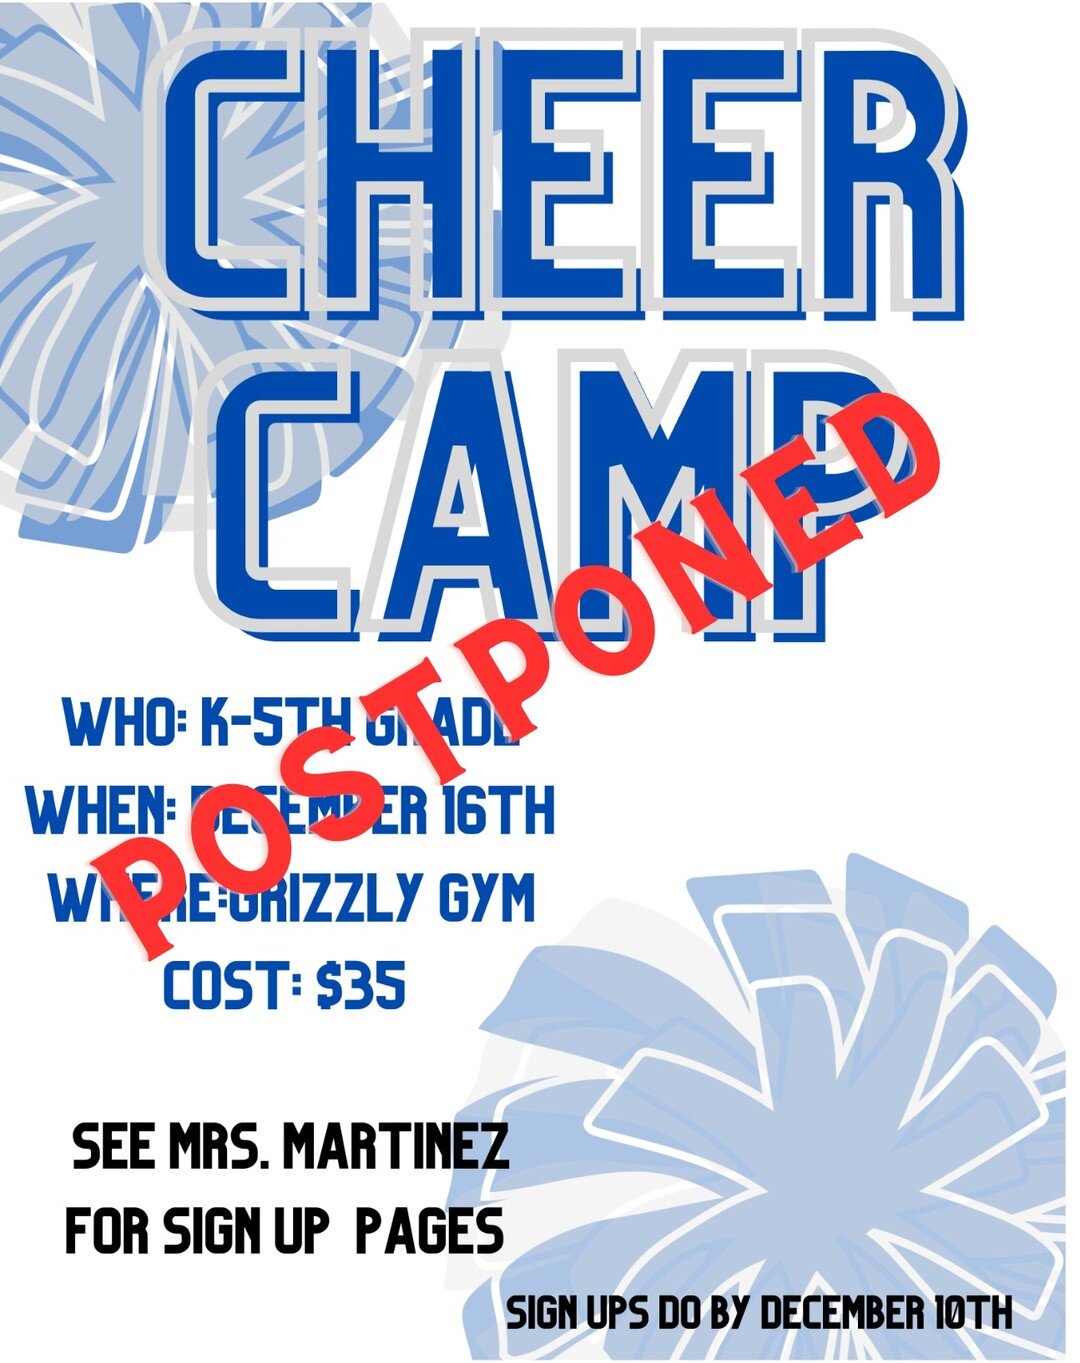 Due to supply issues we are unable to host the GOCA cheer camp this weekend on the 16th. We have rescheduled to January 27th for the camp and the performance will be on the 29th of January. You have the option of a full refund or to stay signed up an